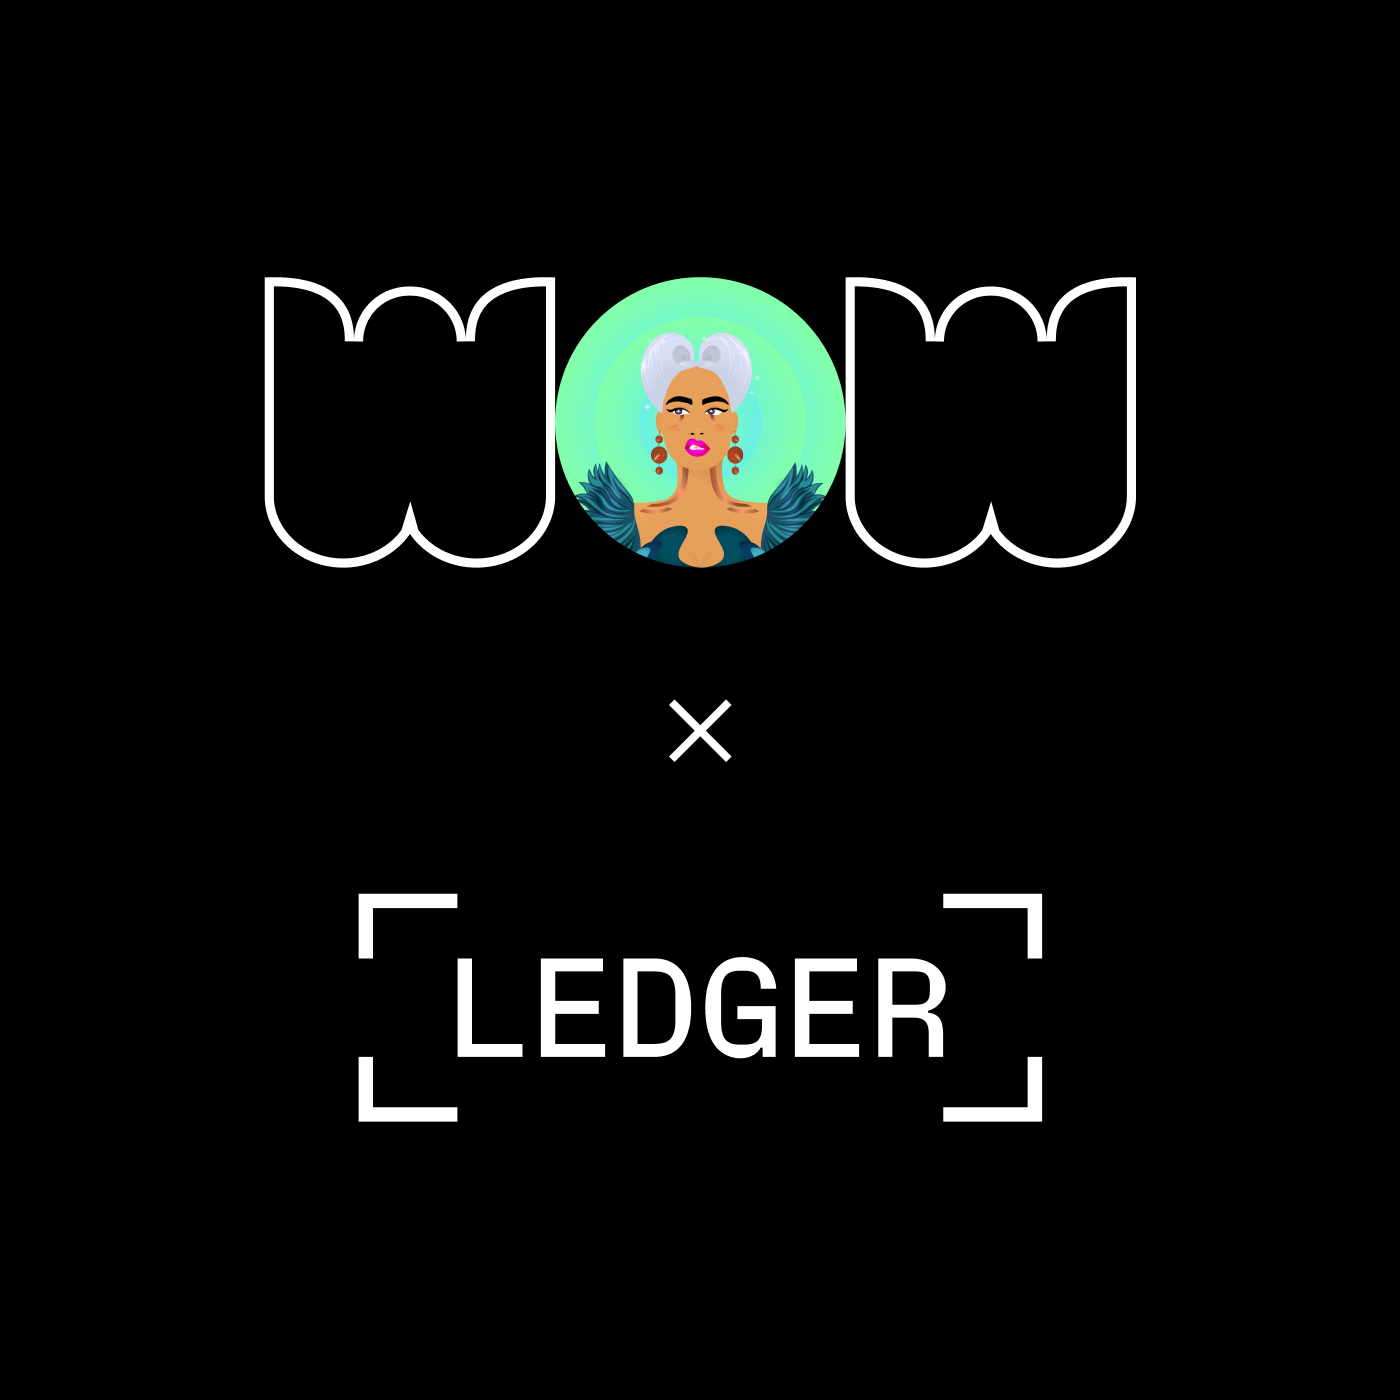 Join Ledger’s contest to win a spot on an upcoming World of Women whitelist